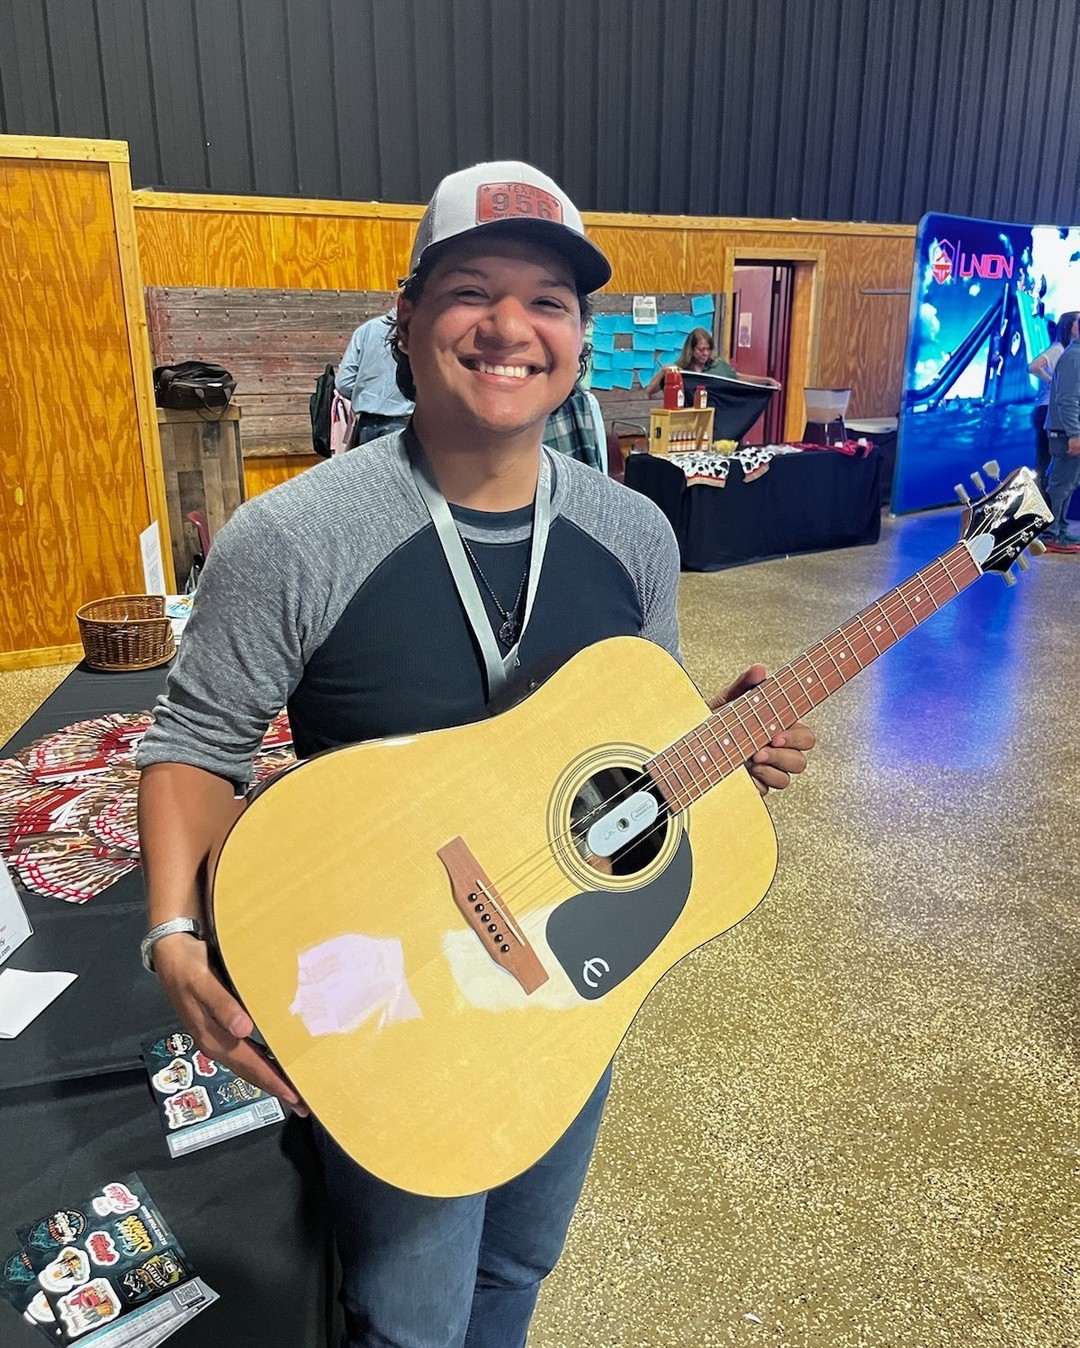 We 💙 giving out guitars!

Make sure to stop by and see us at our conferences to enter your name into drawing for a chance to win!

CCCA Texas Conference: Victor Delgado- Big Red's Ranch San Benito

#StickersAndMore
#ElevateYourBrand